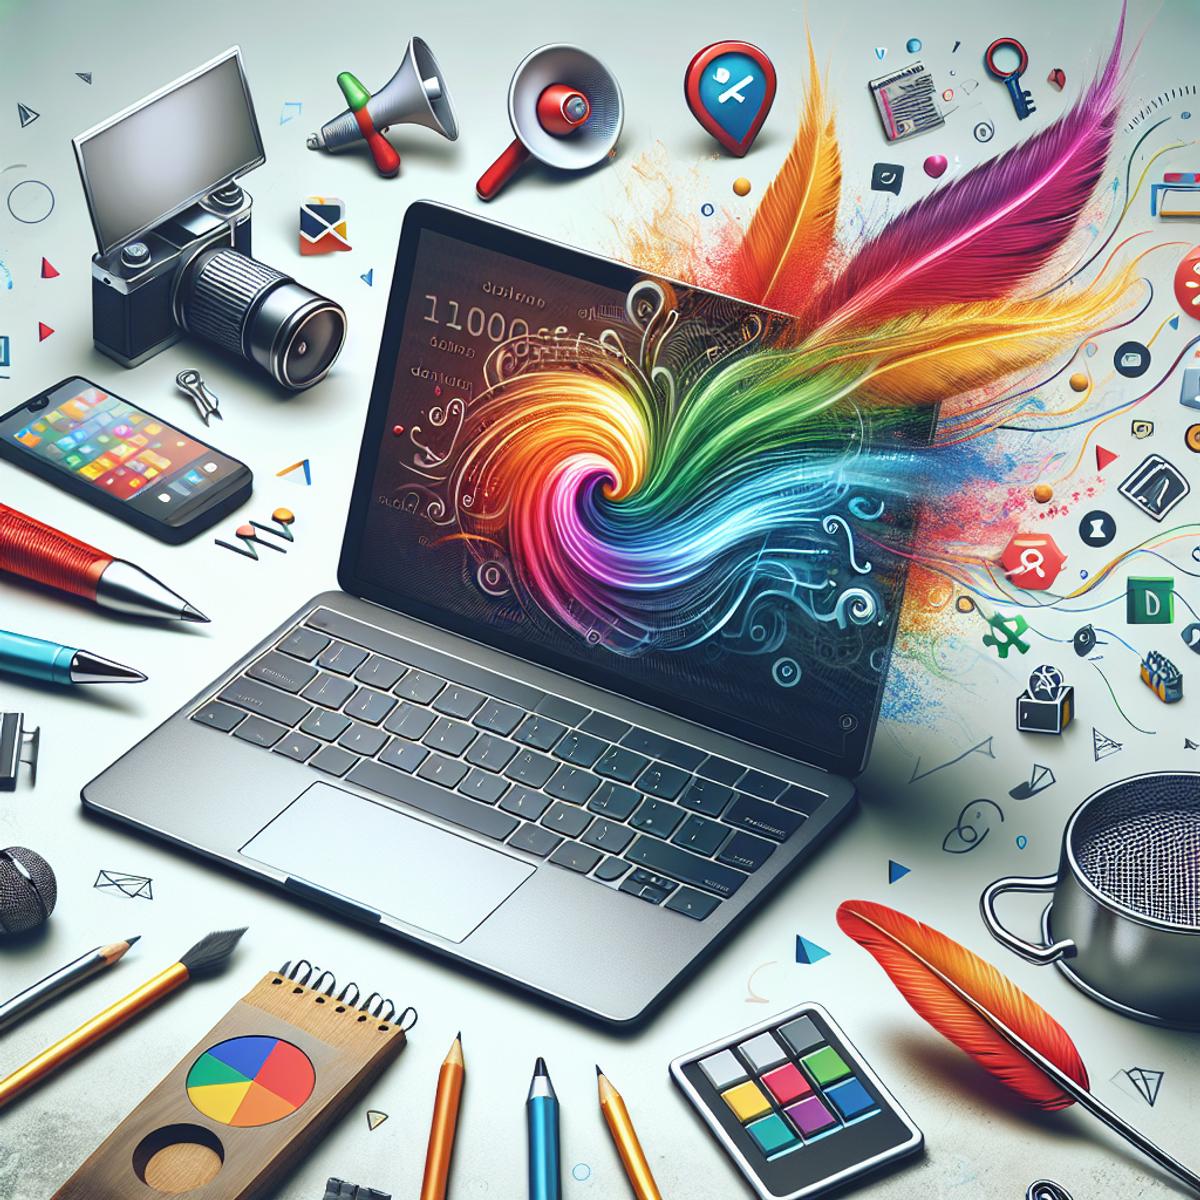 A laptop with a dynamic, colorful symbol on the screen surrounded by icons representing graphic design, software development, writing, and marketing.